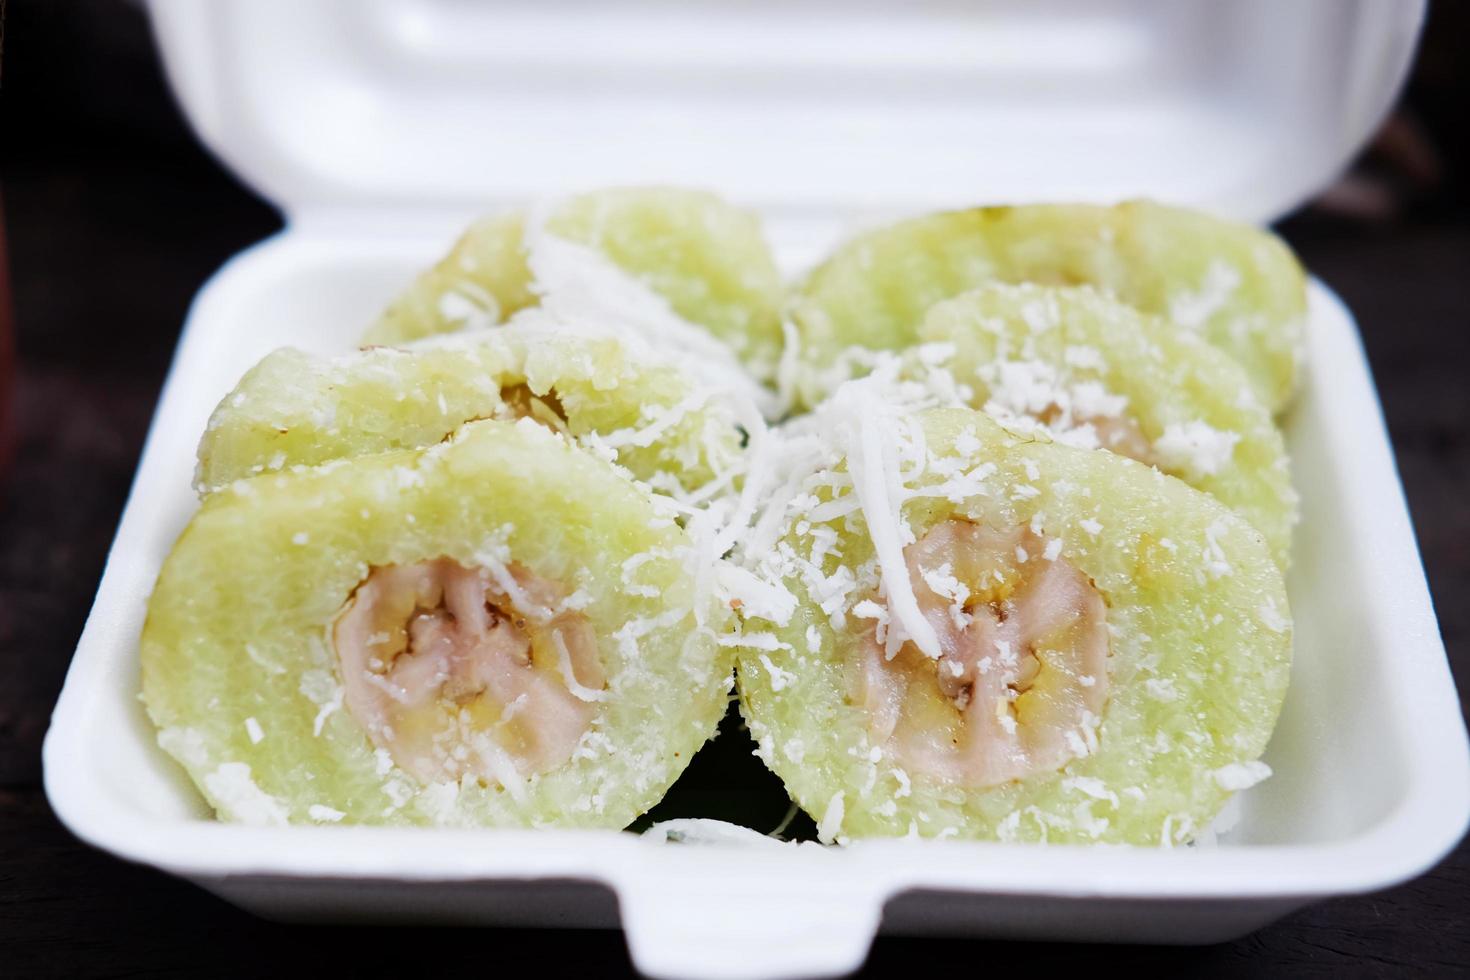 Thai sweet Dessert, Banana in steamed Sticky Rice pieces on white Foam box photo